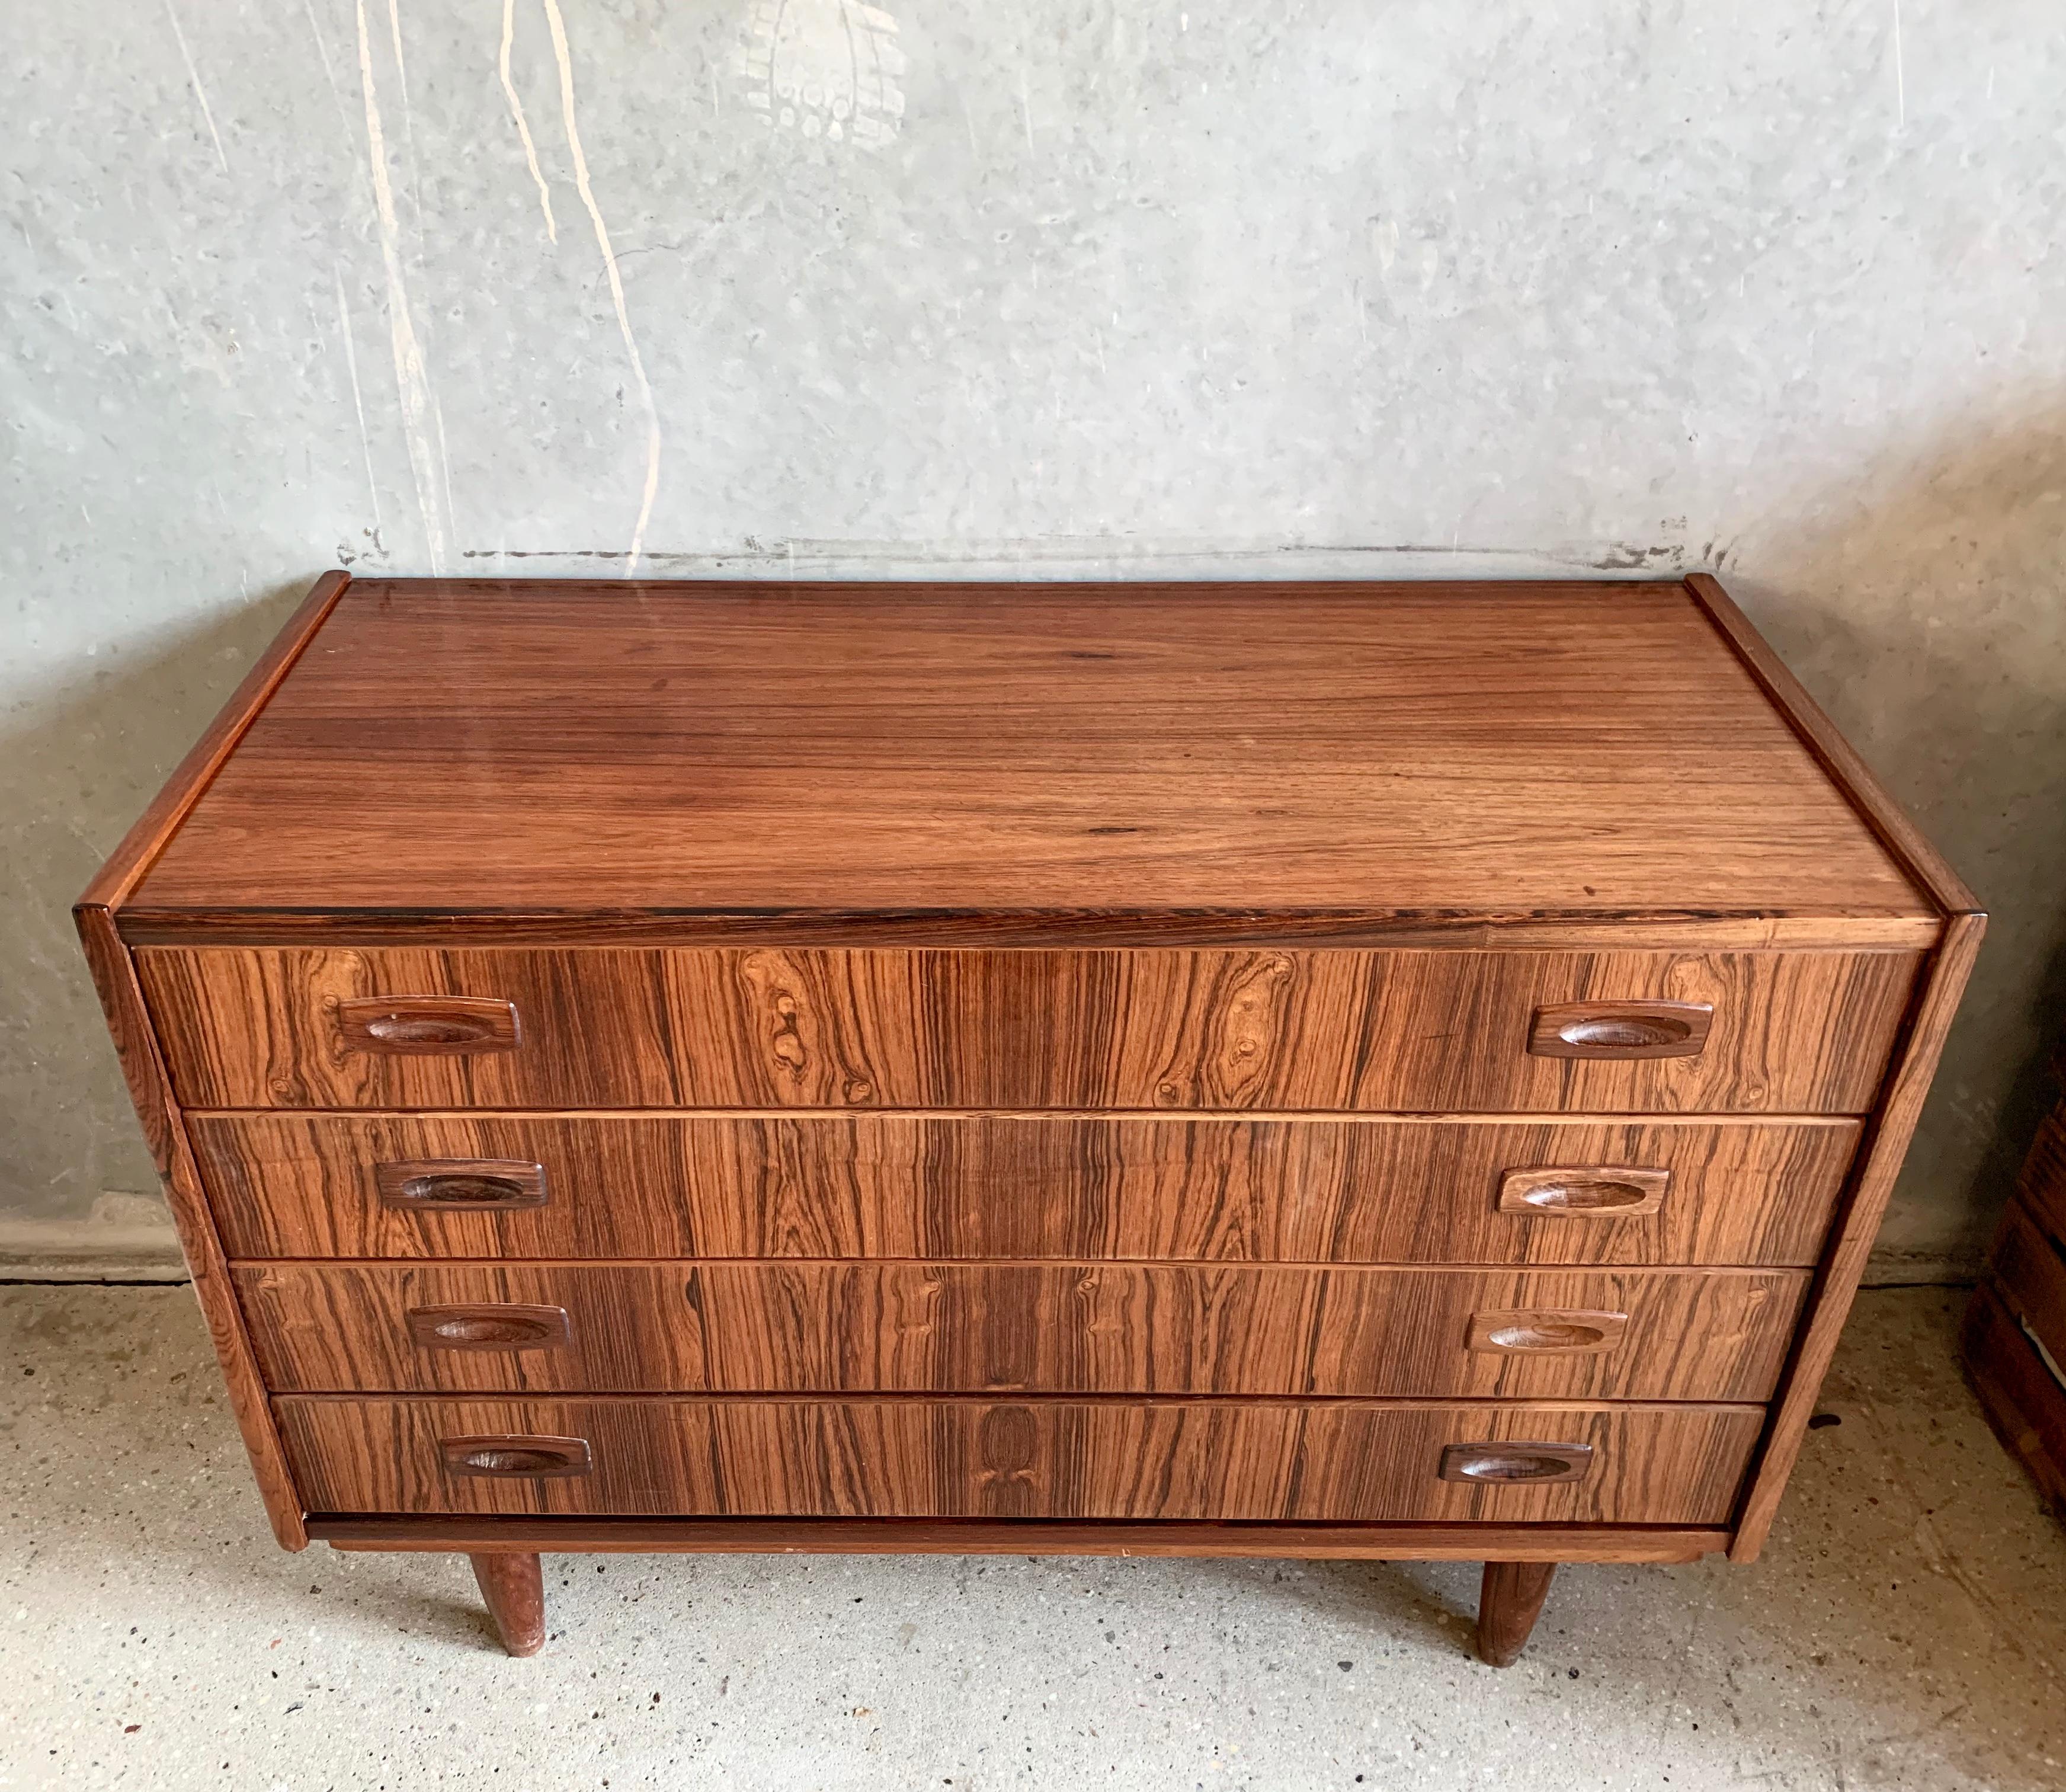 Chest of drawers in rosewood featuring four drawers and tapperes legs.